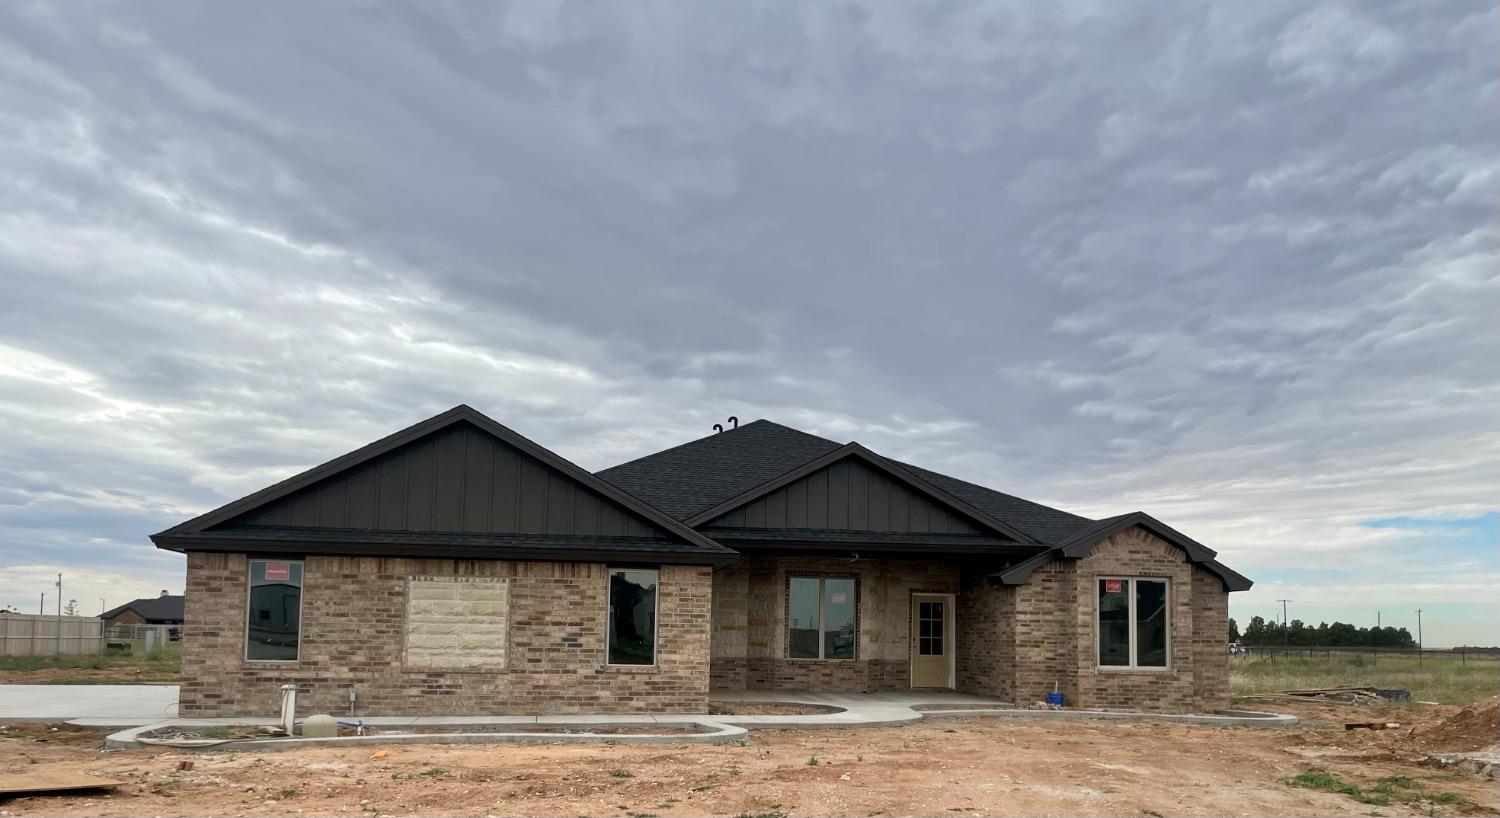 New construction on one acre in New Home! 4 bedrooms 3 baths in a great community. Still under construction and should be complete middle of November. $16K Fence allowance and $20k landscaping allowance. Call for more details!